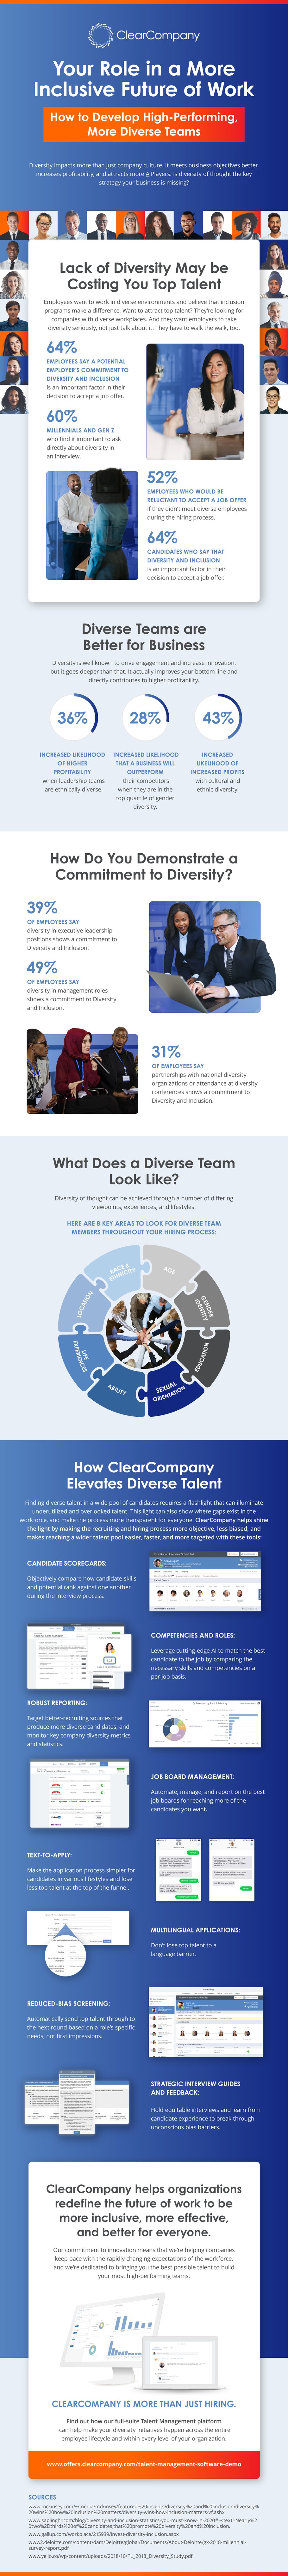 Your Role in a More Inclusive Future of Work Infographic